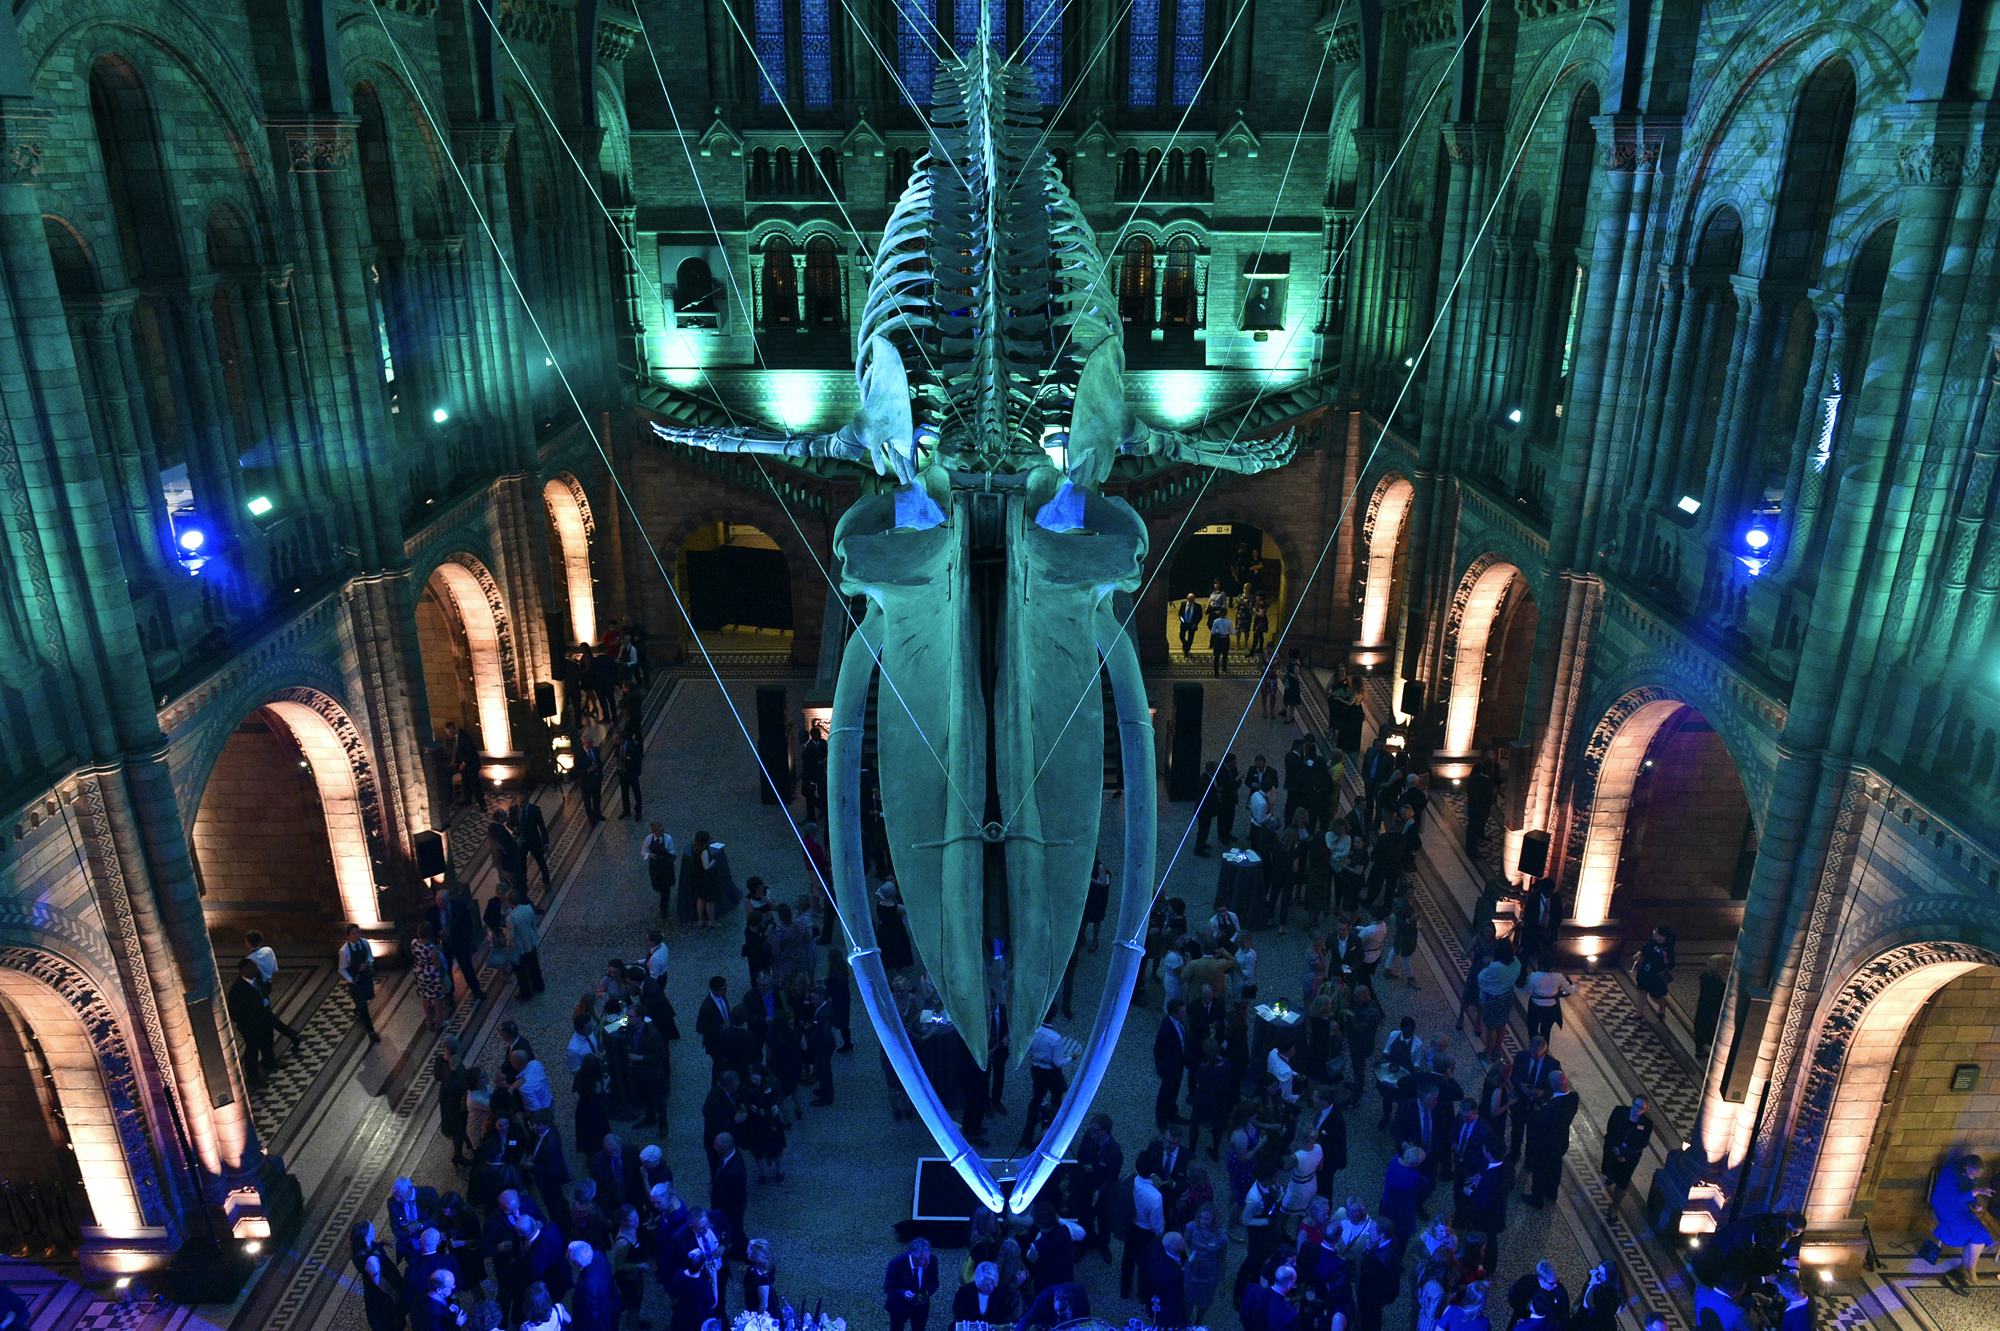 SquareMeal V+E newsletter 20 July 2017 - Natural History Museum transforms Hintz Hall